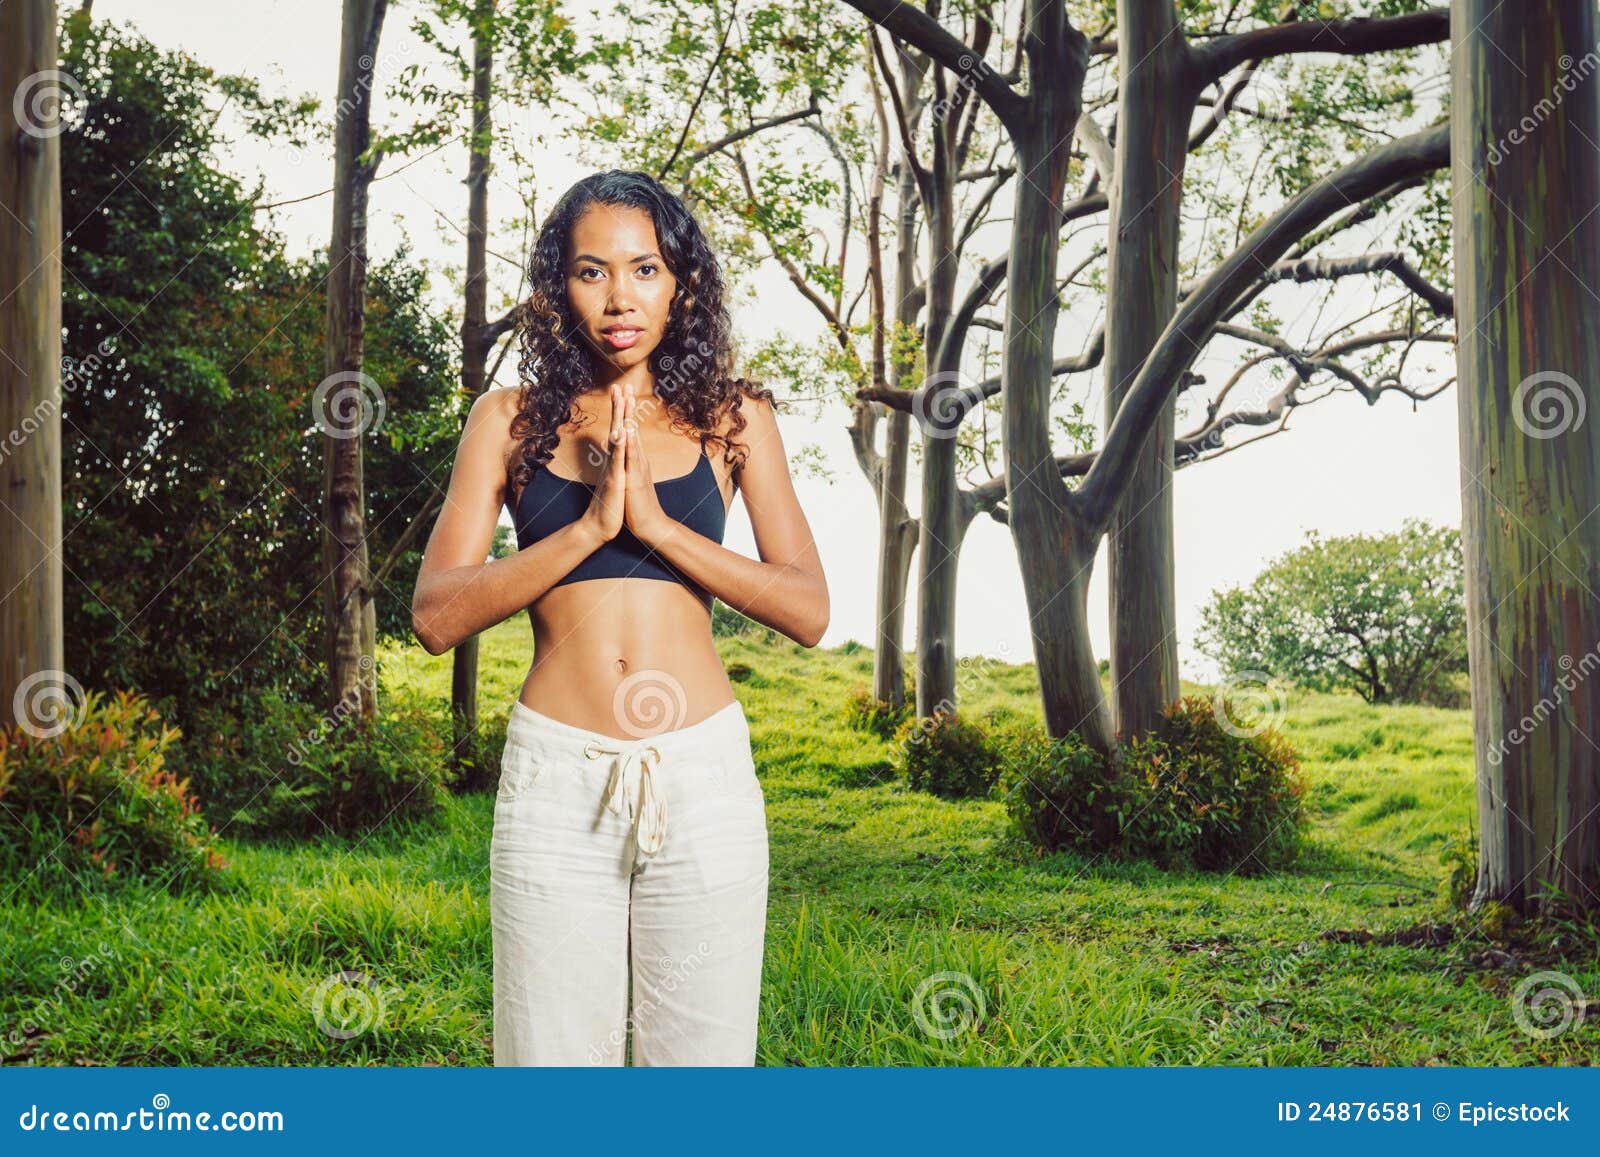 Women practicing yoga. Yoga woman outside in nature